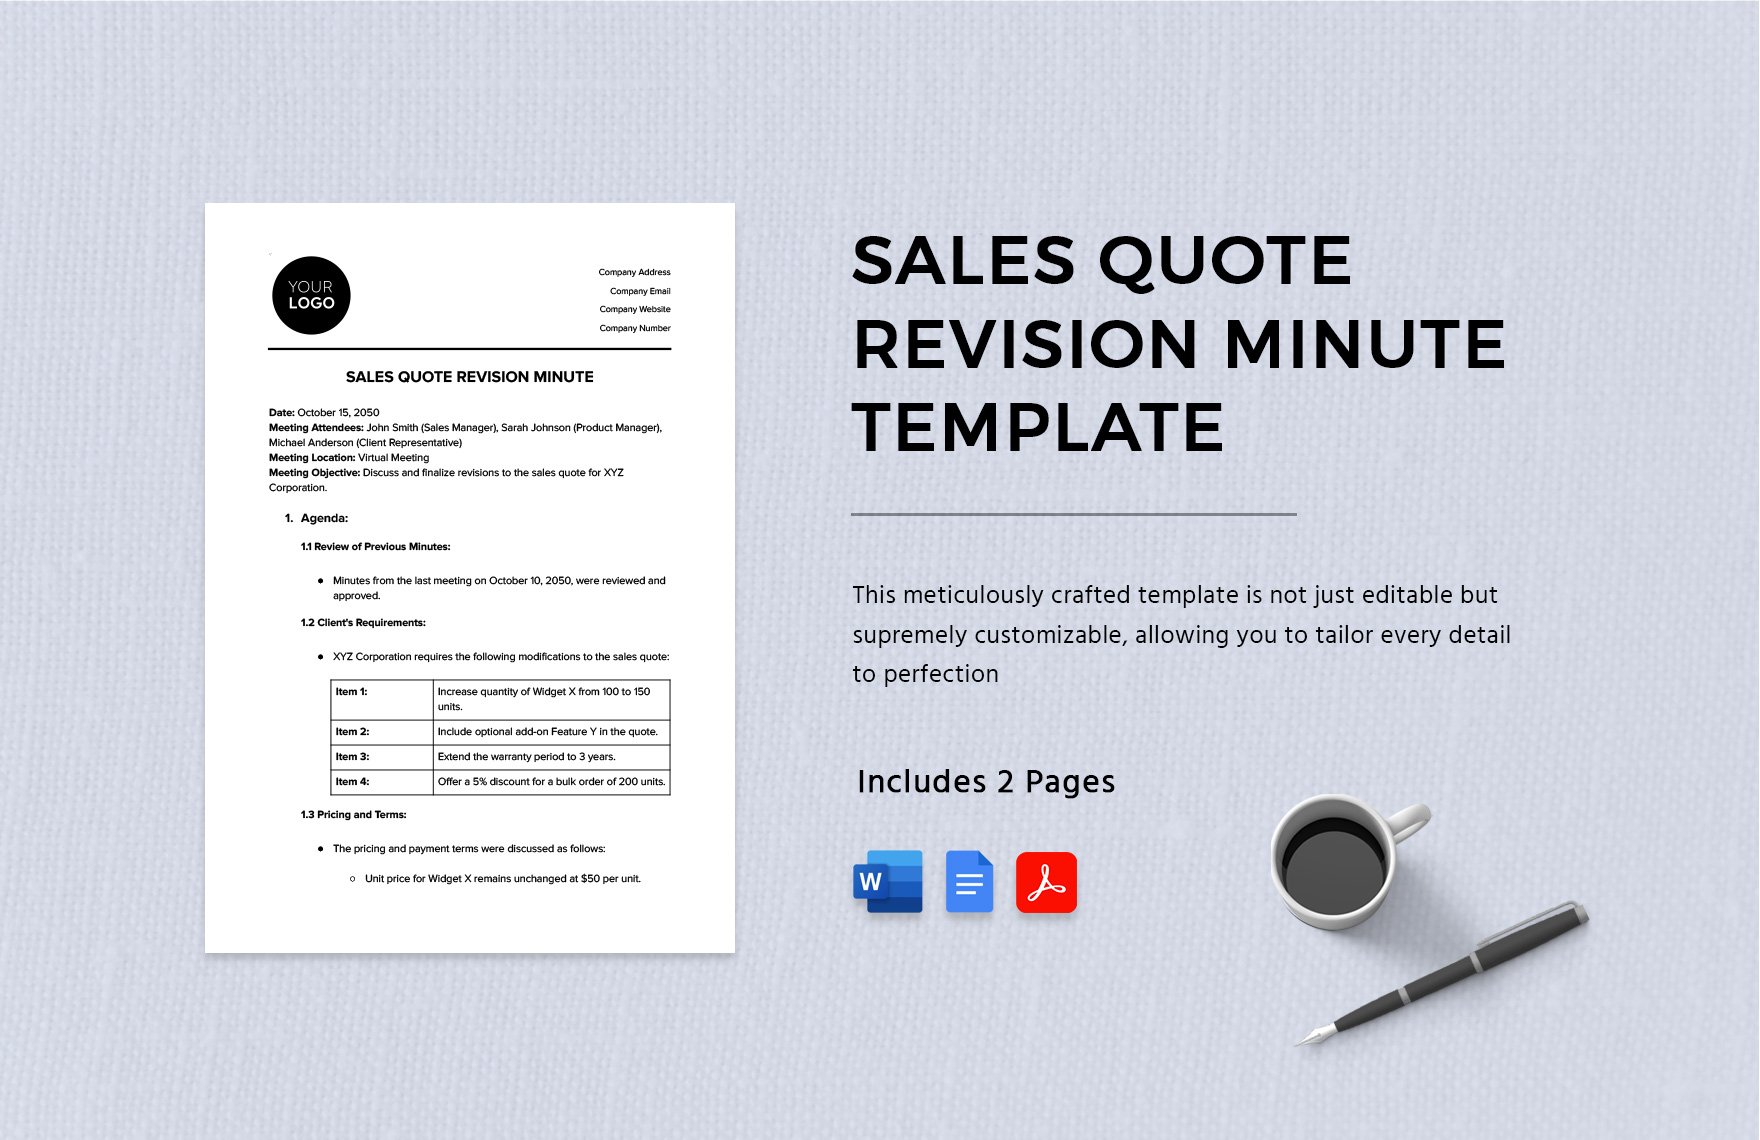 Sales Quote Revision Minute Template in Word, Google Docs, PDF